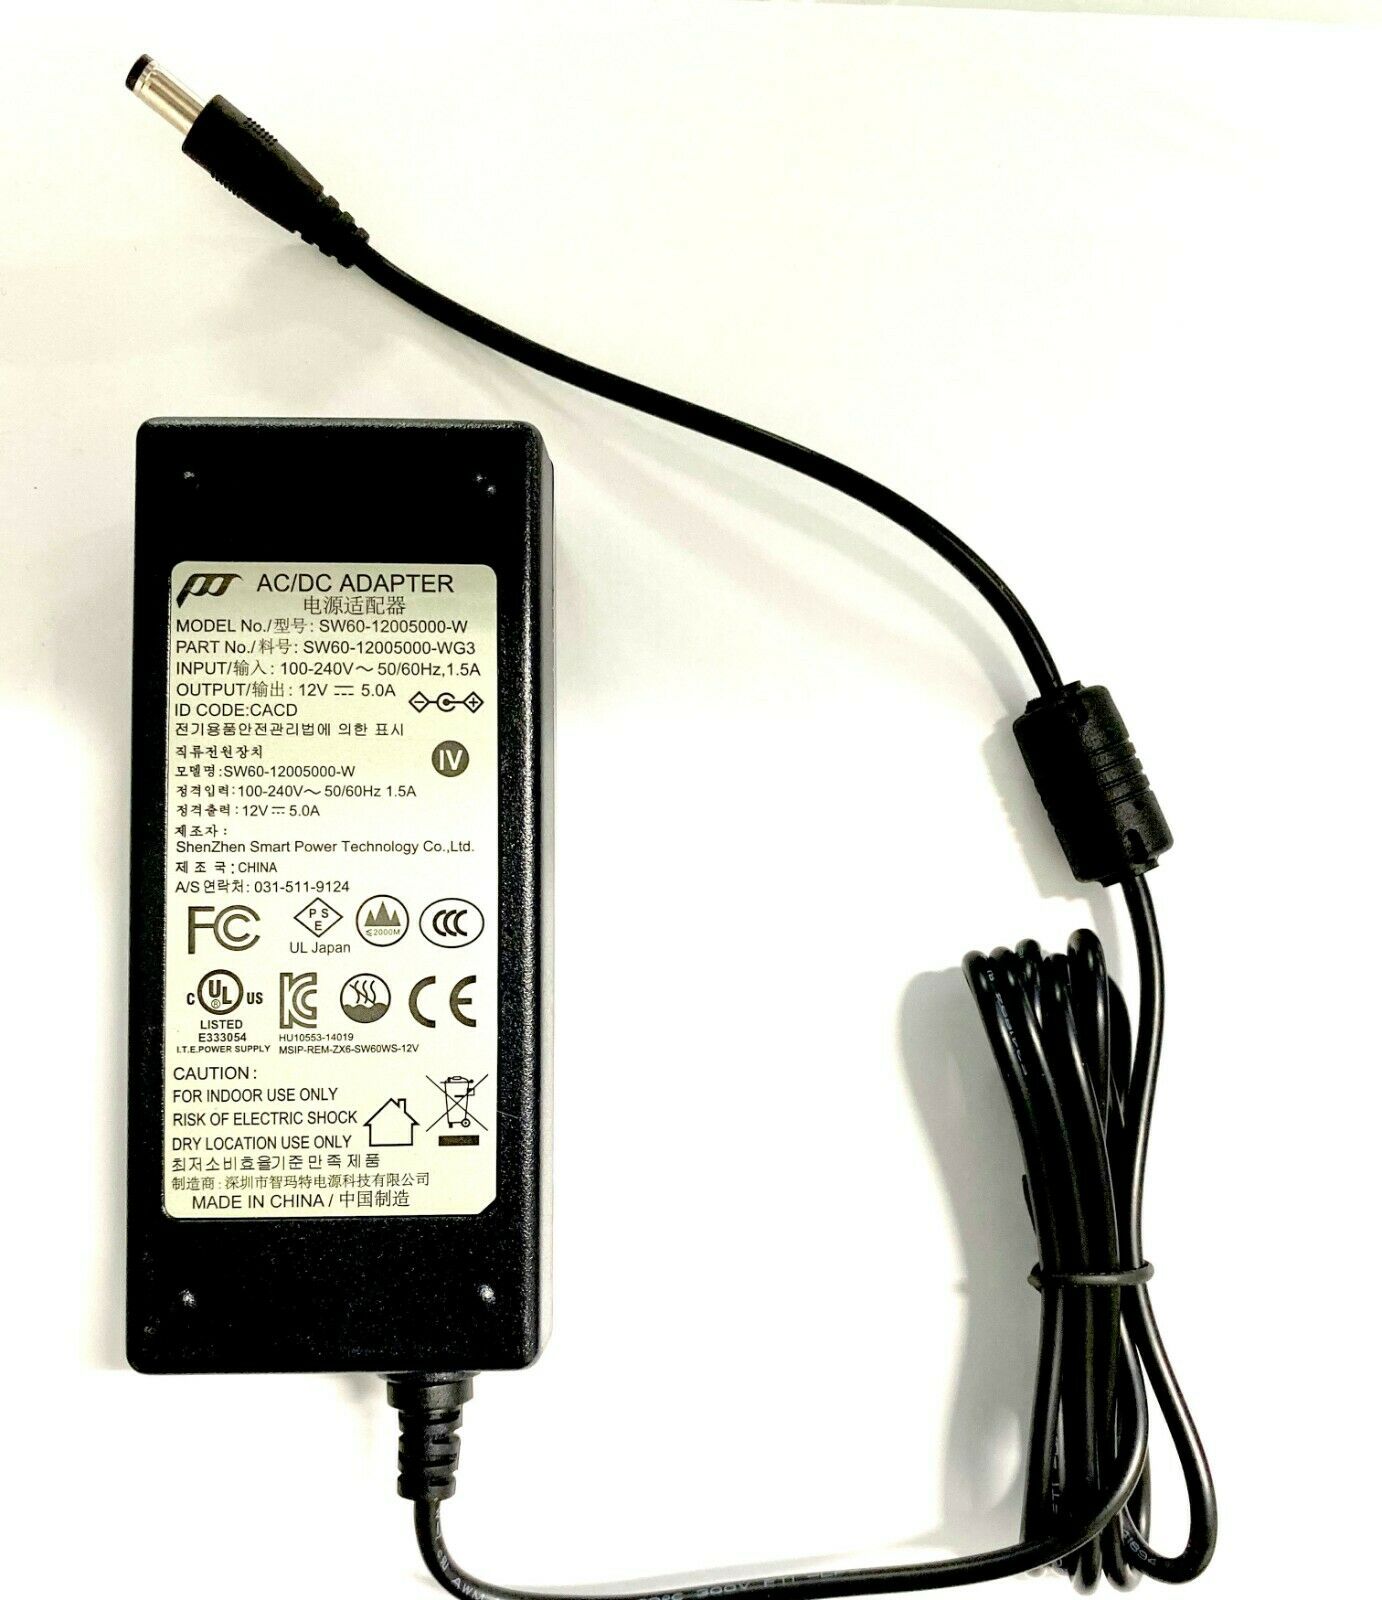 POWER-TEK AC DC Adapter Model: SW60-12005000-W MPN: SW60-12005000-WG3 Type: AC/DC Adapter Features: Powered Cable